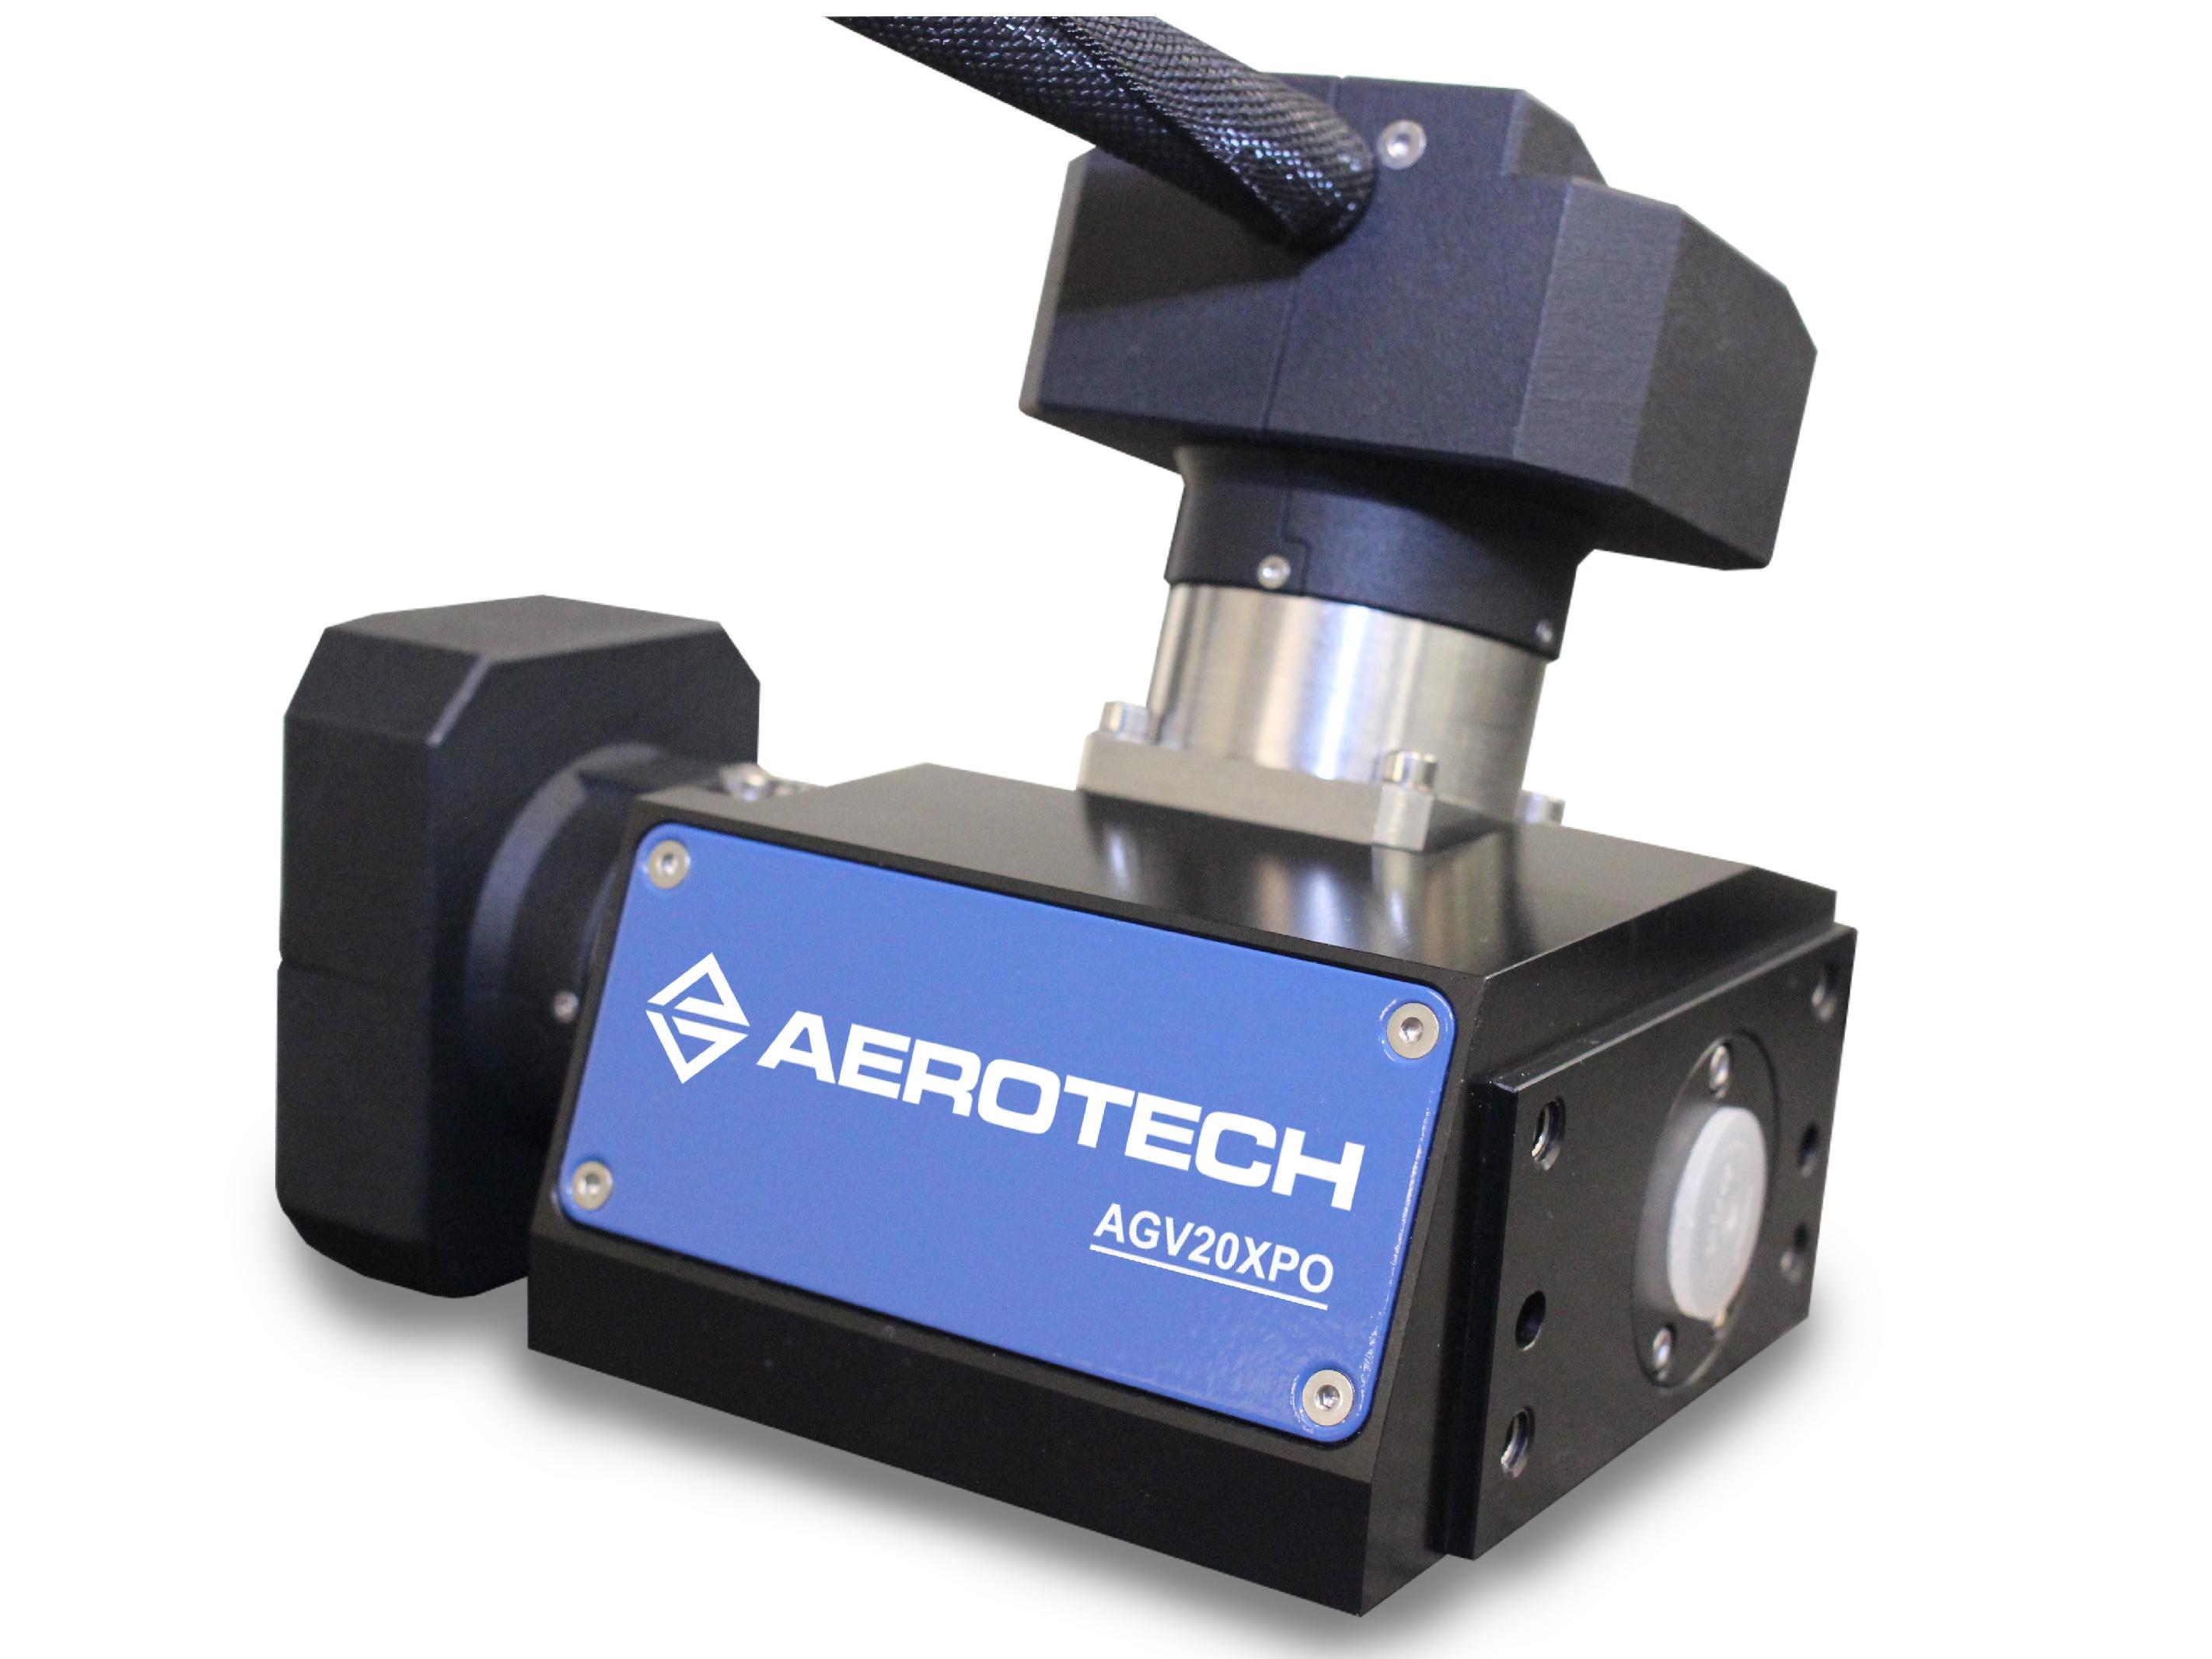 Aerotech launches ‘highly dynamic’ 2-axis galvo scanner